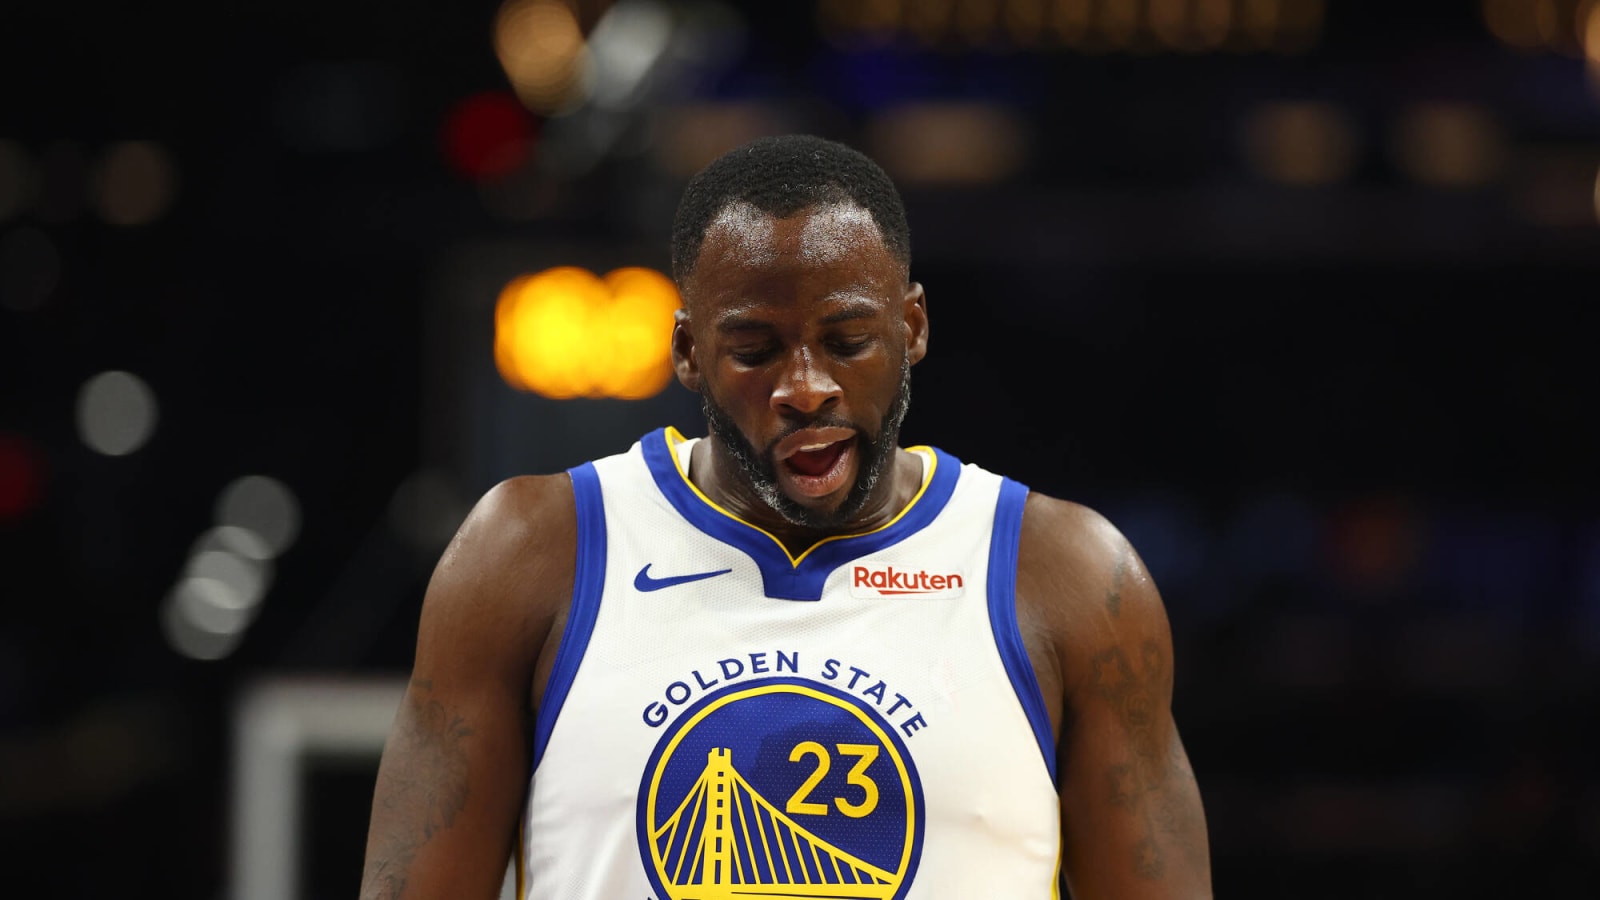 Richard Jefferson Calls Out Draymond Green After He Punched Jusuf Nurkic: 'You&#39;re Hurting The Game'